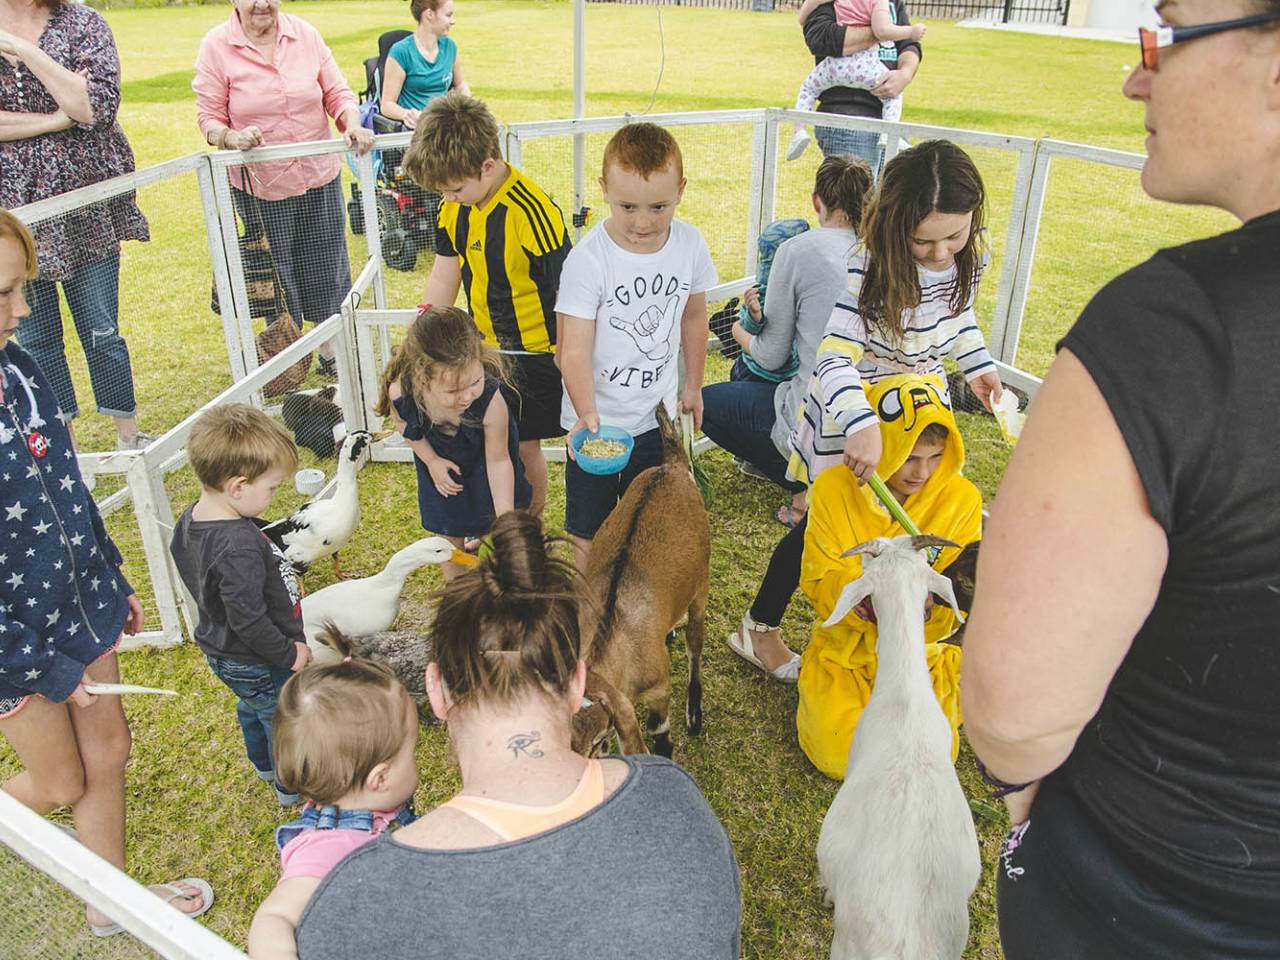 Children Petting Animals At A Small Animal Farm On The Grass Area At The Outside Event Venue.